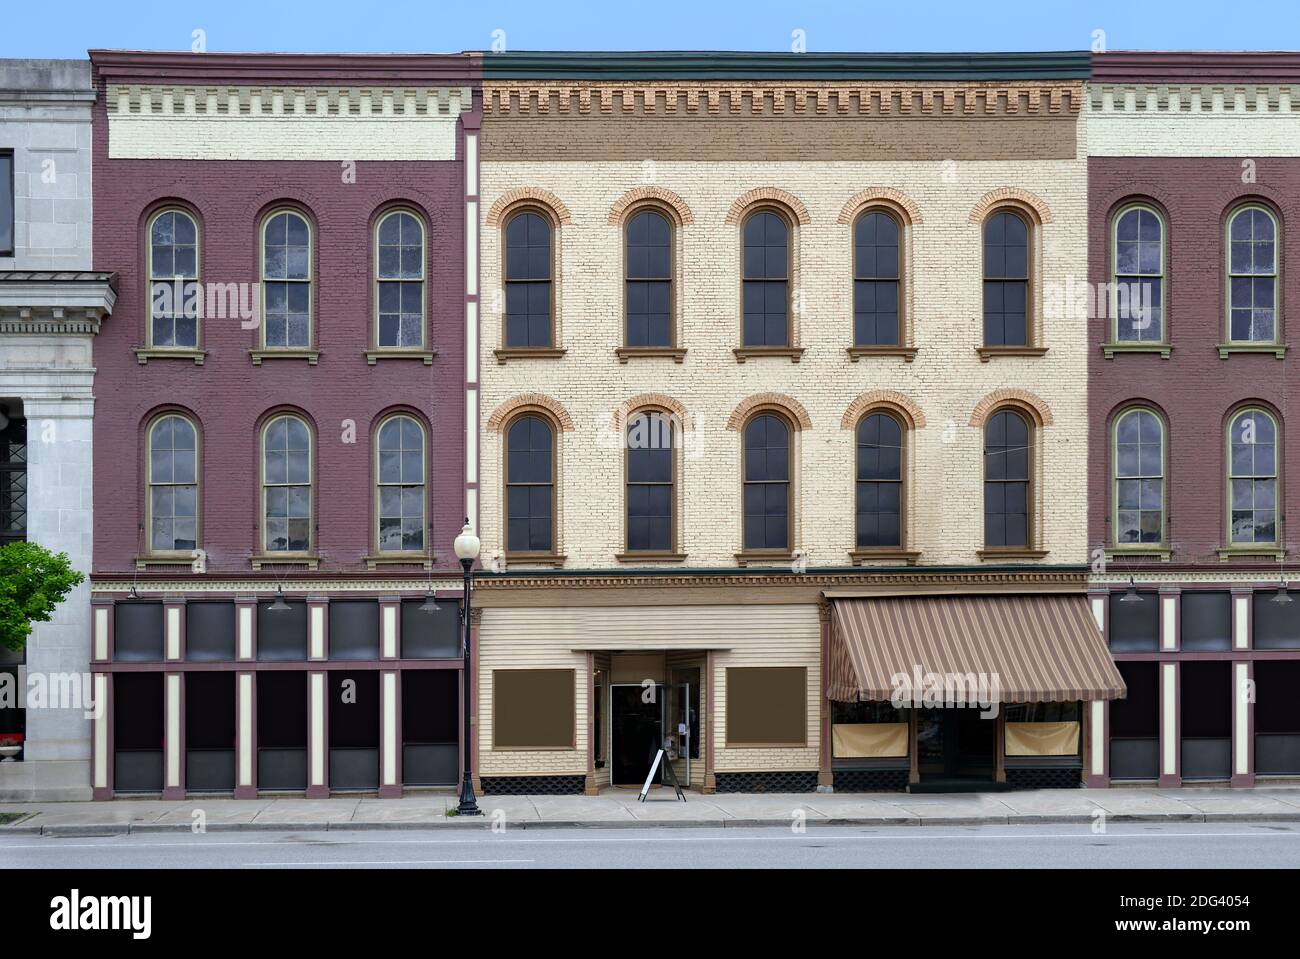 old fashioned small town main street facade with painted brick buildings Stock Photo